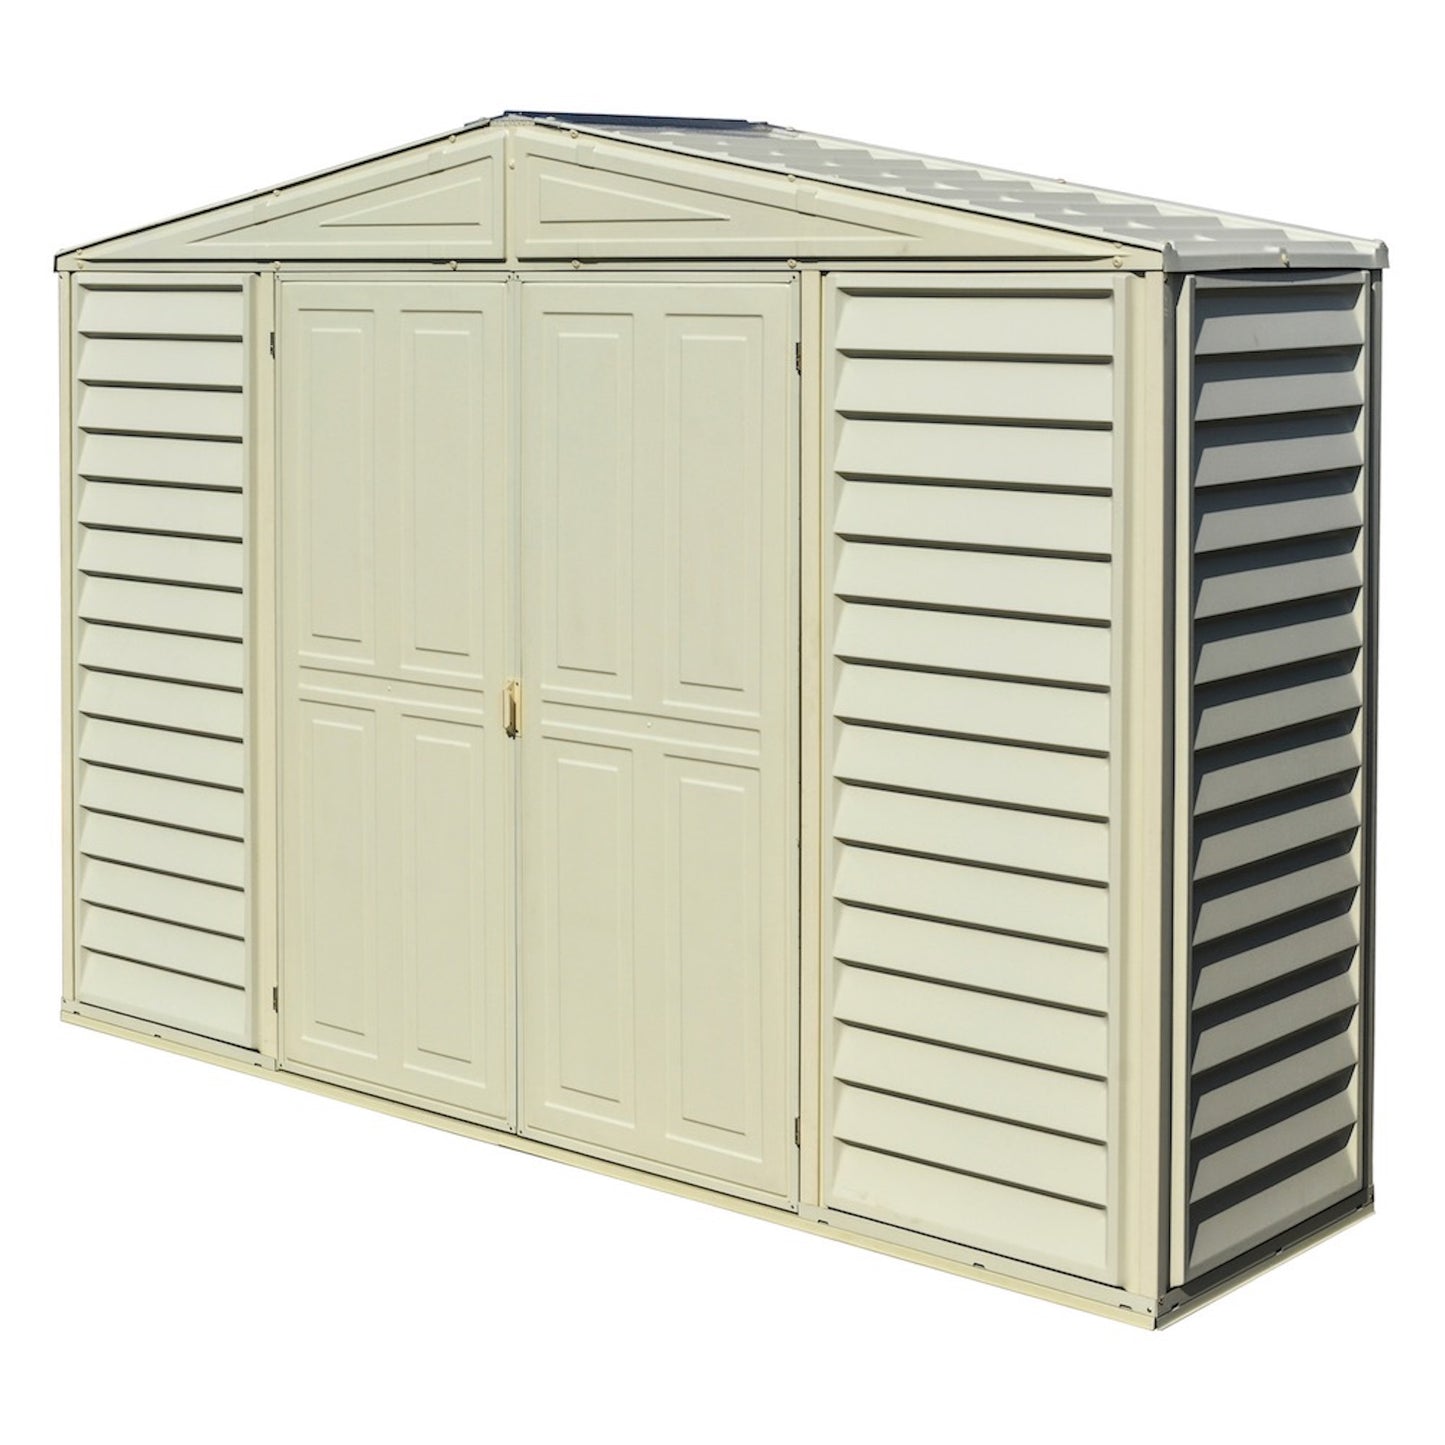 DuraMax 10.5ft x 3ft SidePro Vinyl Shed with Foundation Kit